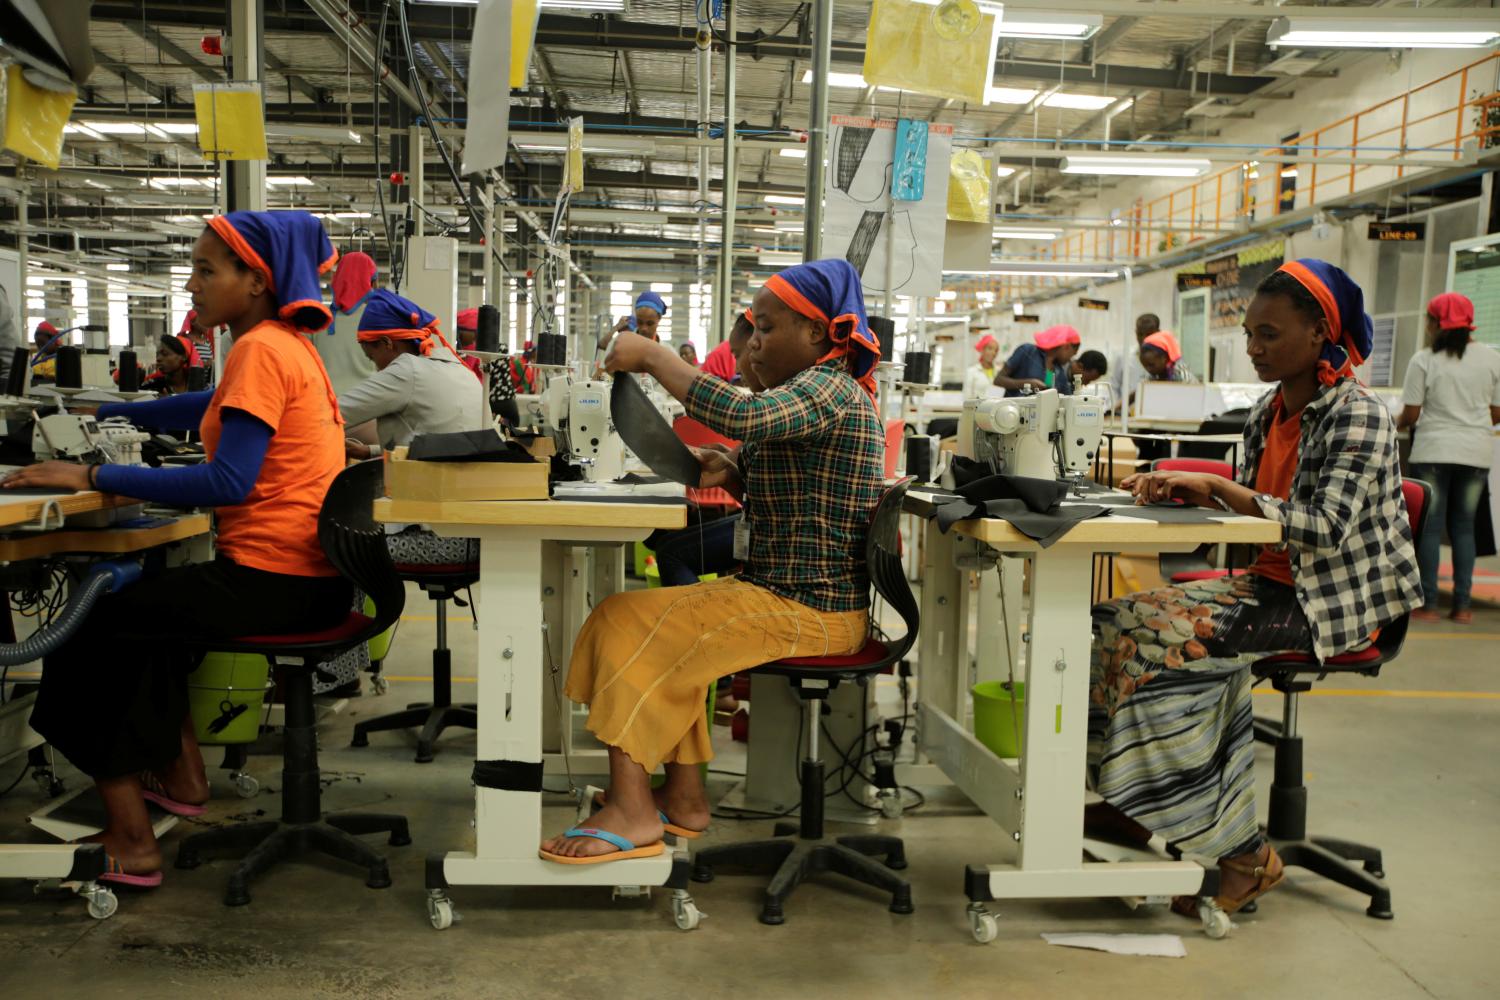 Workers sew clothes inside the Indochine Apparel PLC textile factory in Hawassa Industrial Park in Southern Nations, Nationalities and Peoples region, Ethiopia November 17, 2017. Picture taken November 17, 2017.REUTERS/Tiksa Negeri - RC1A972030A0